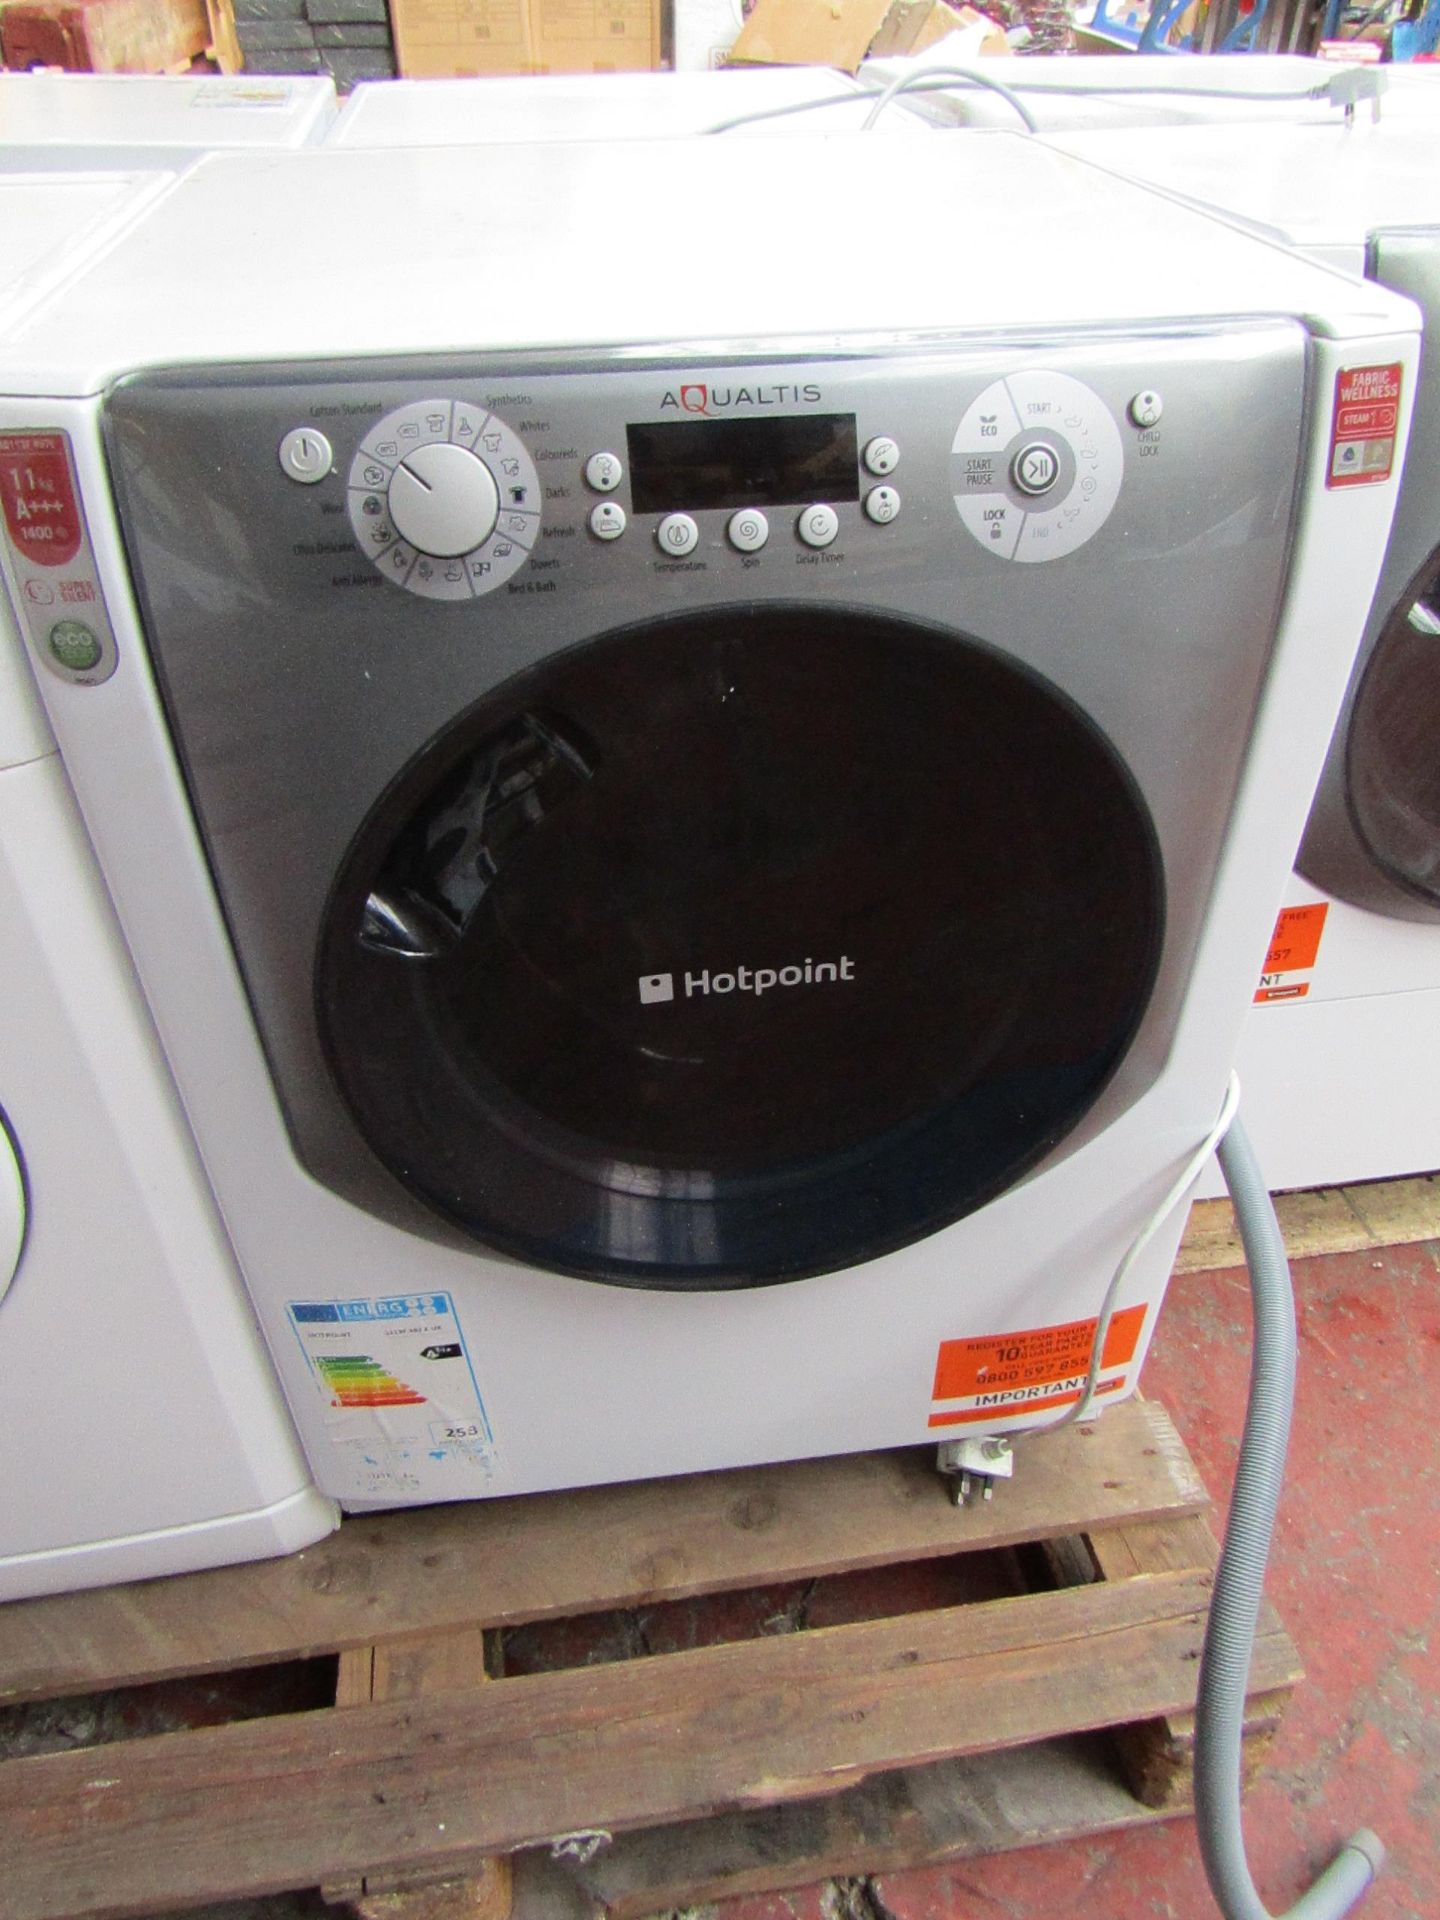 Hotpoint Aqualtis Eco Tech 11Kg washing machine, powers on and off repeatedly.